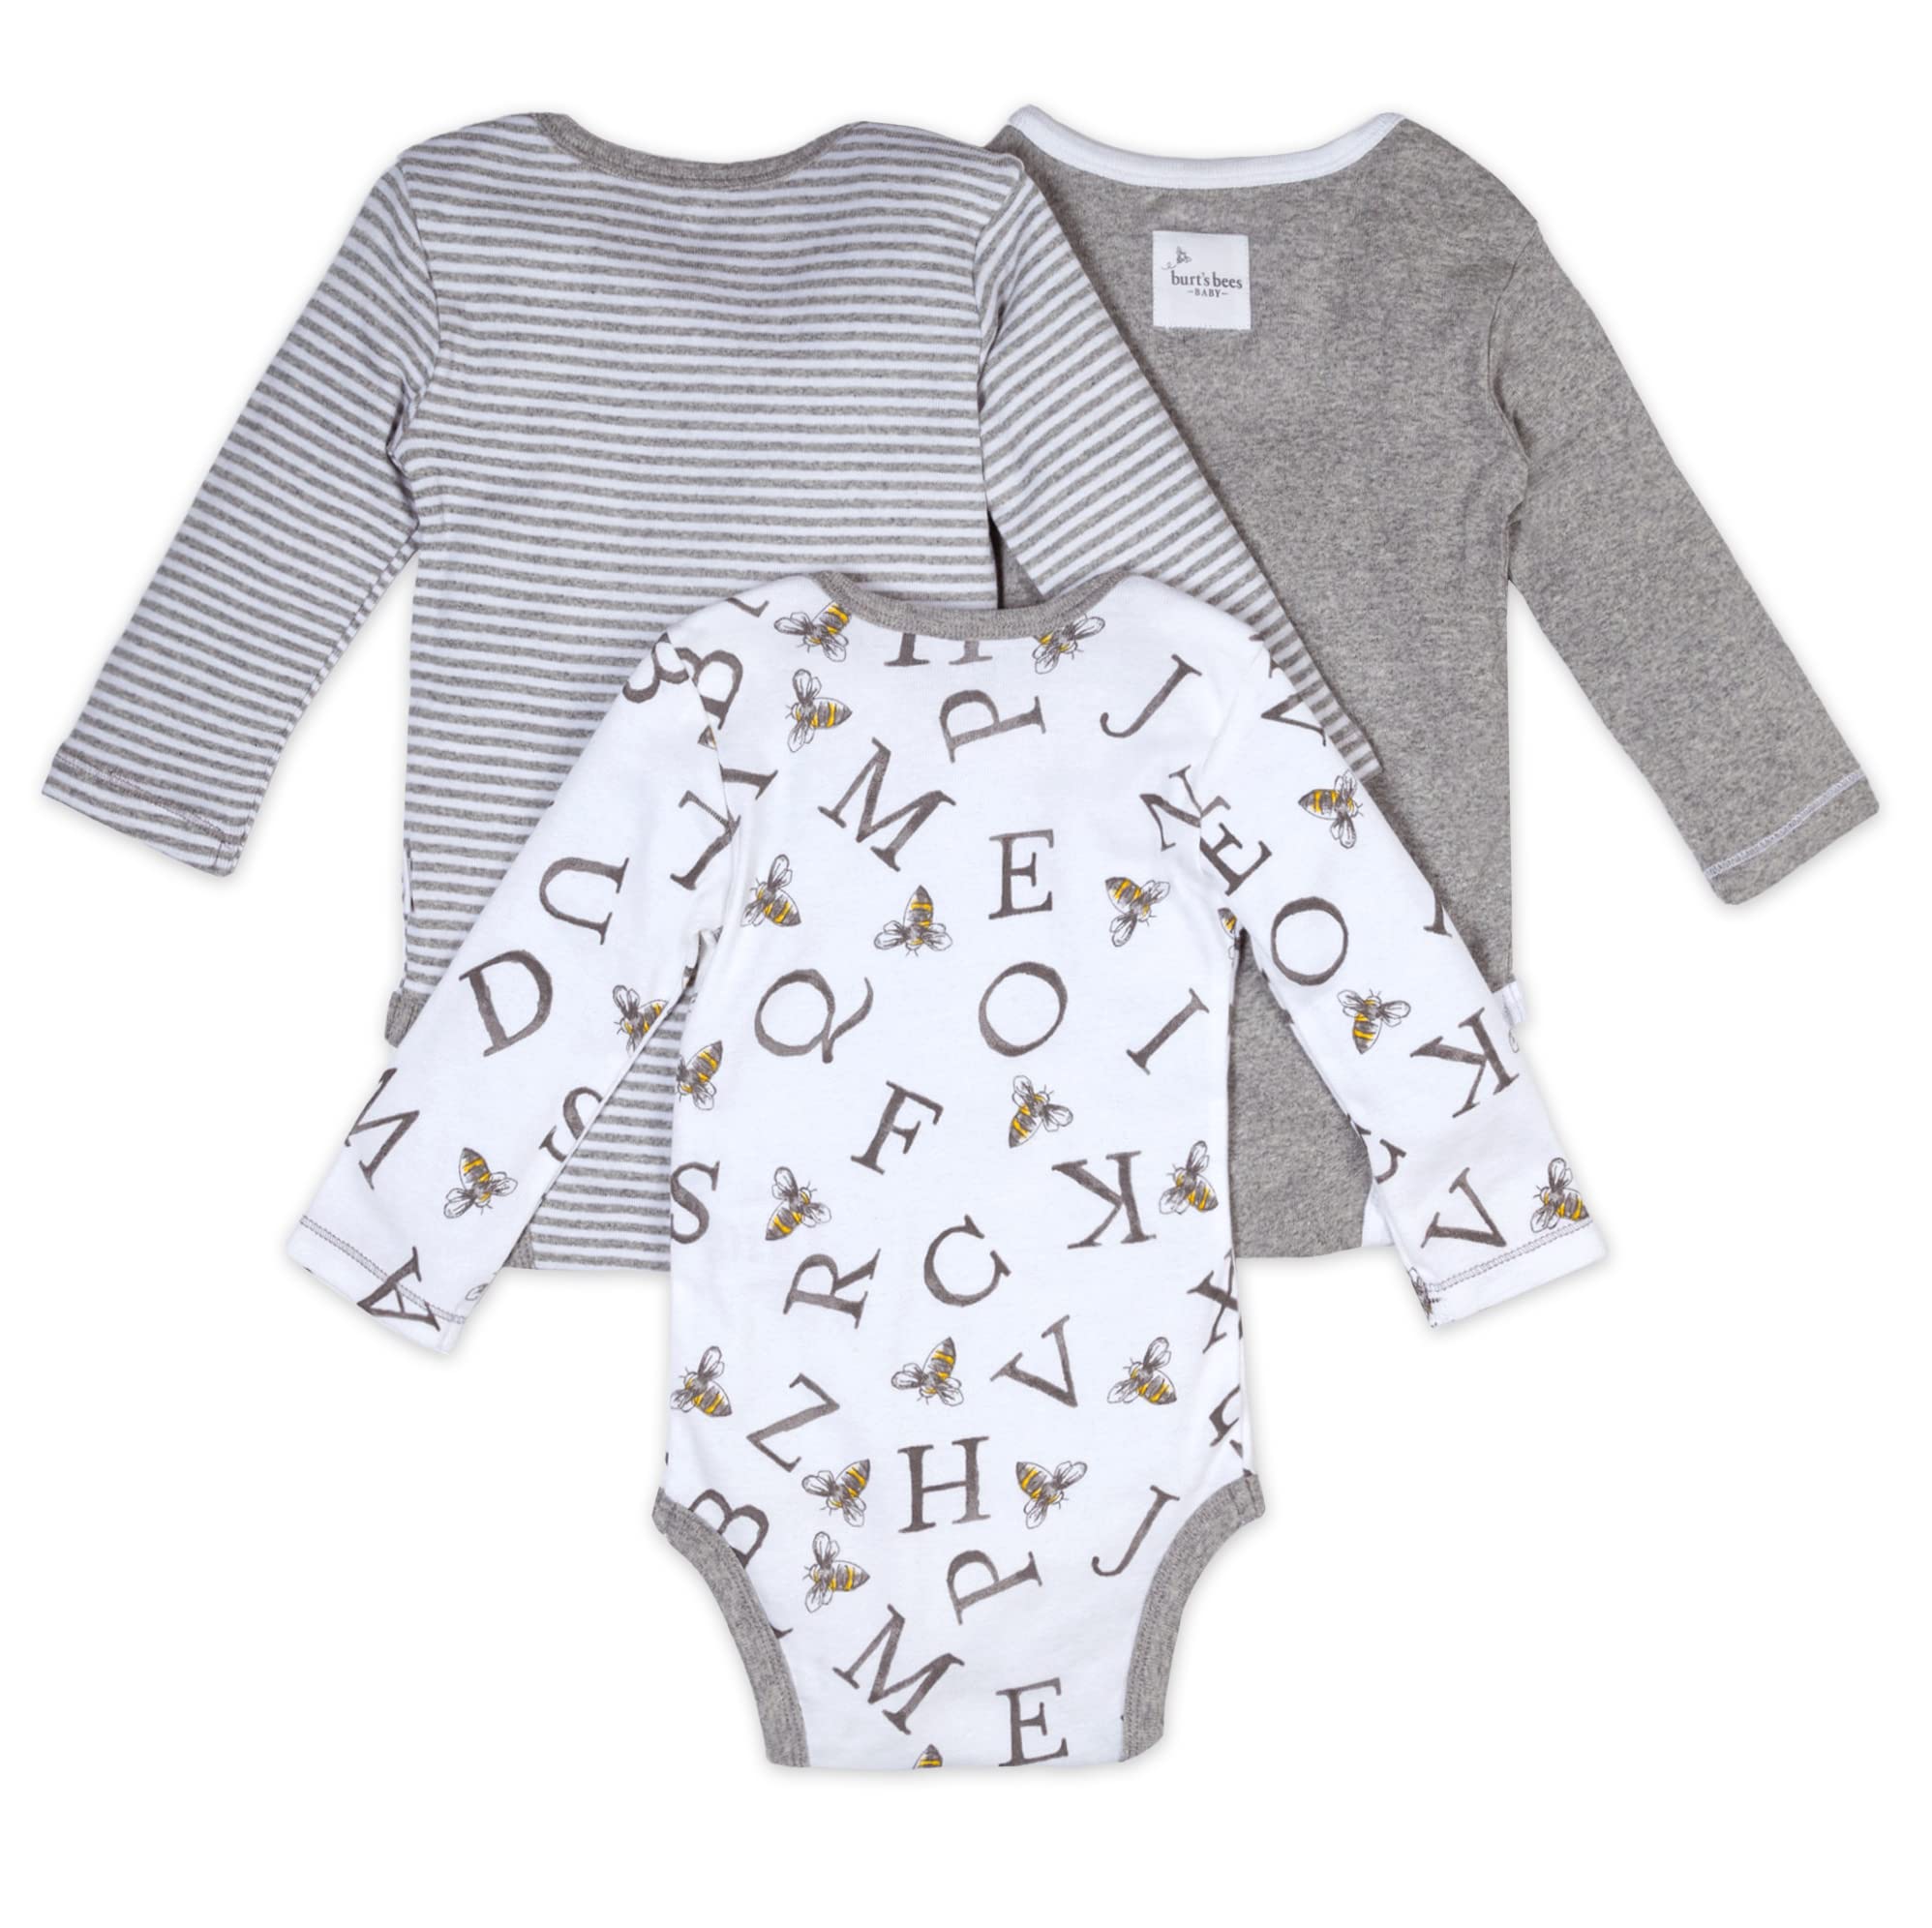 Burt's Bees Baby Unisex Baby Bodysuits, 3-Pack Long & Short-Sleeve One-Pieces, 100% Organic Cotton